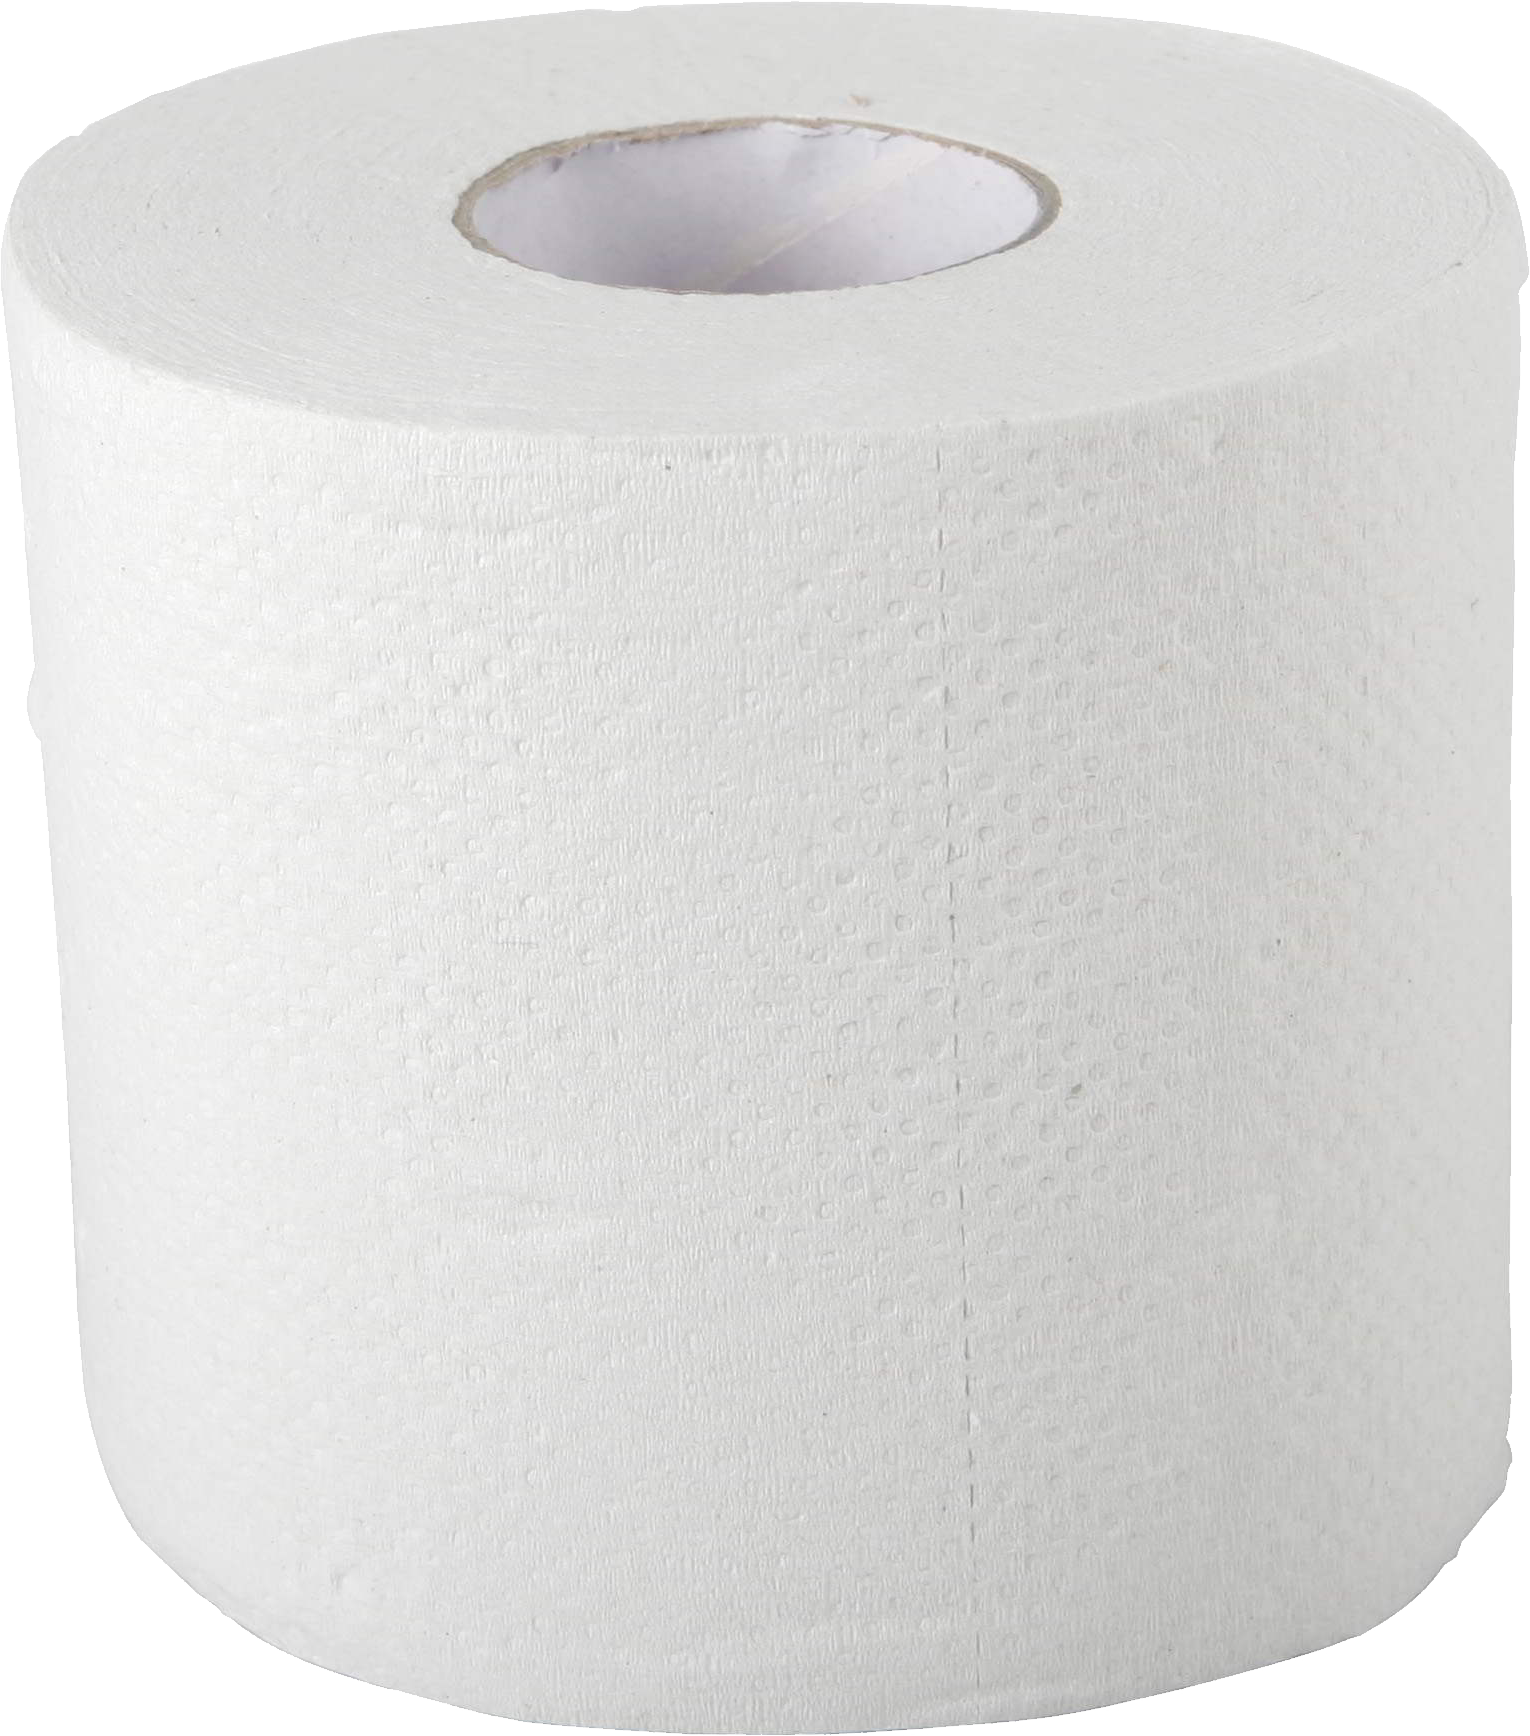 Toilet paper PNG images Download 